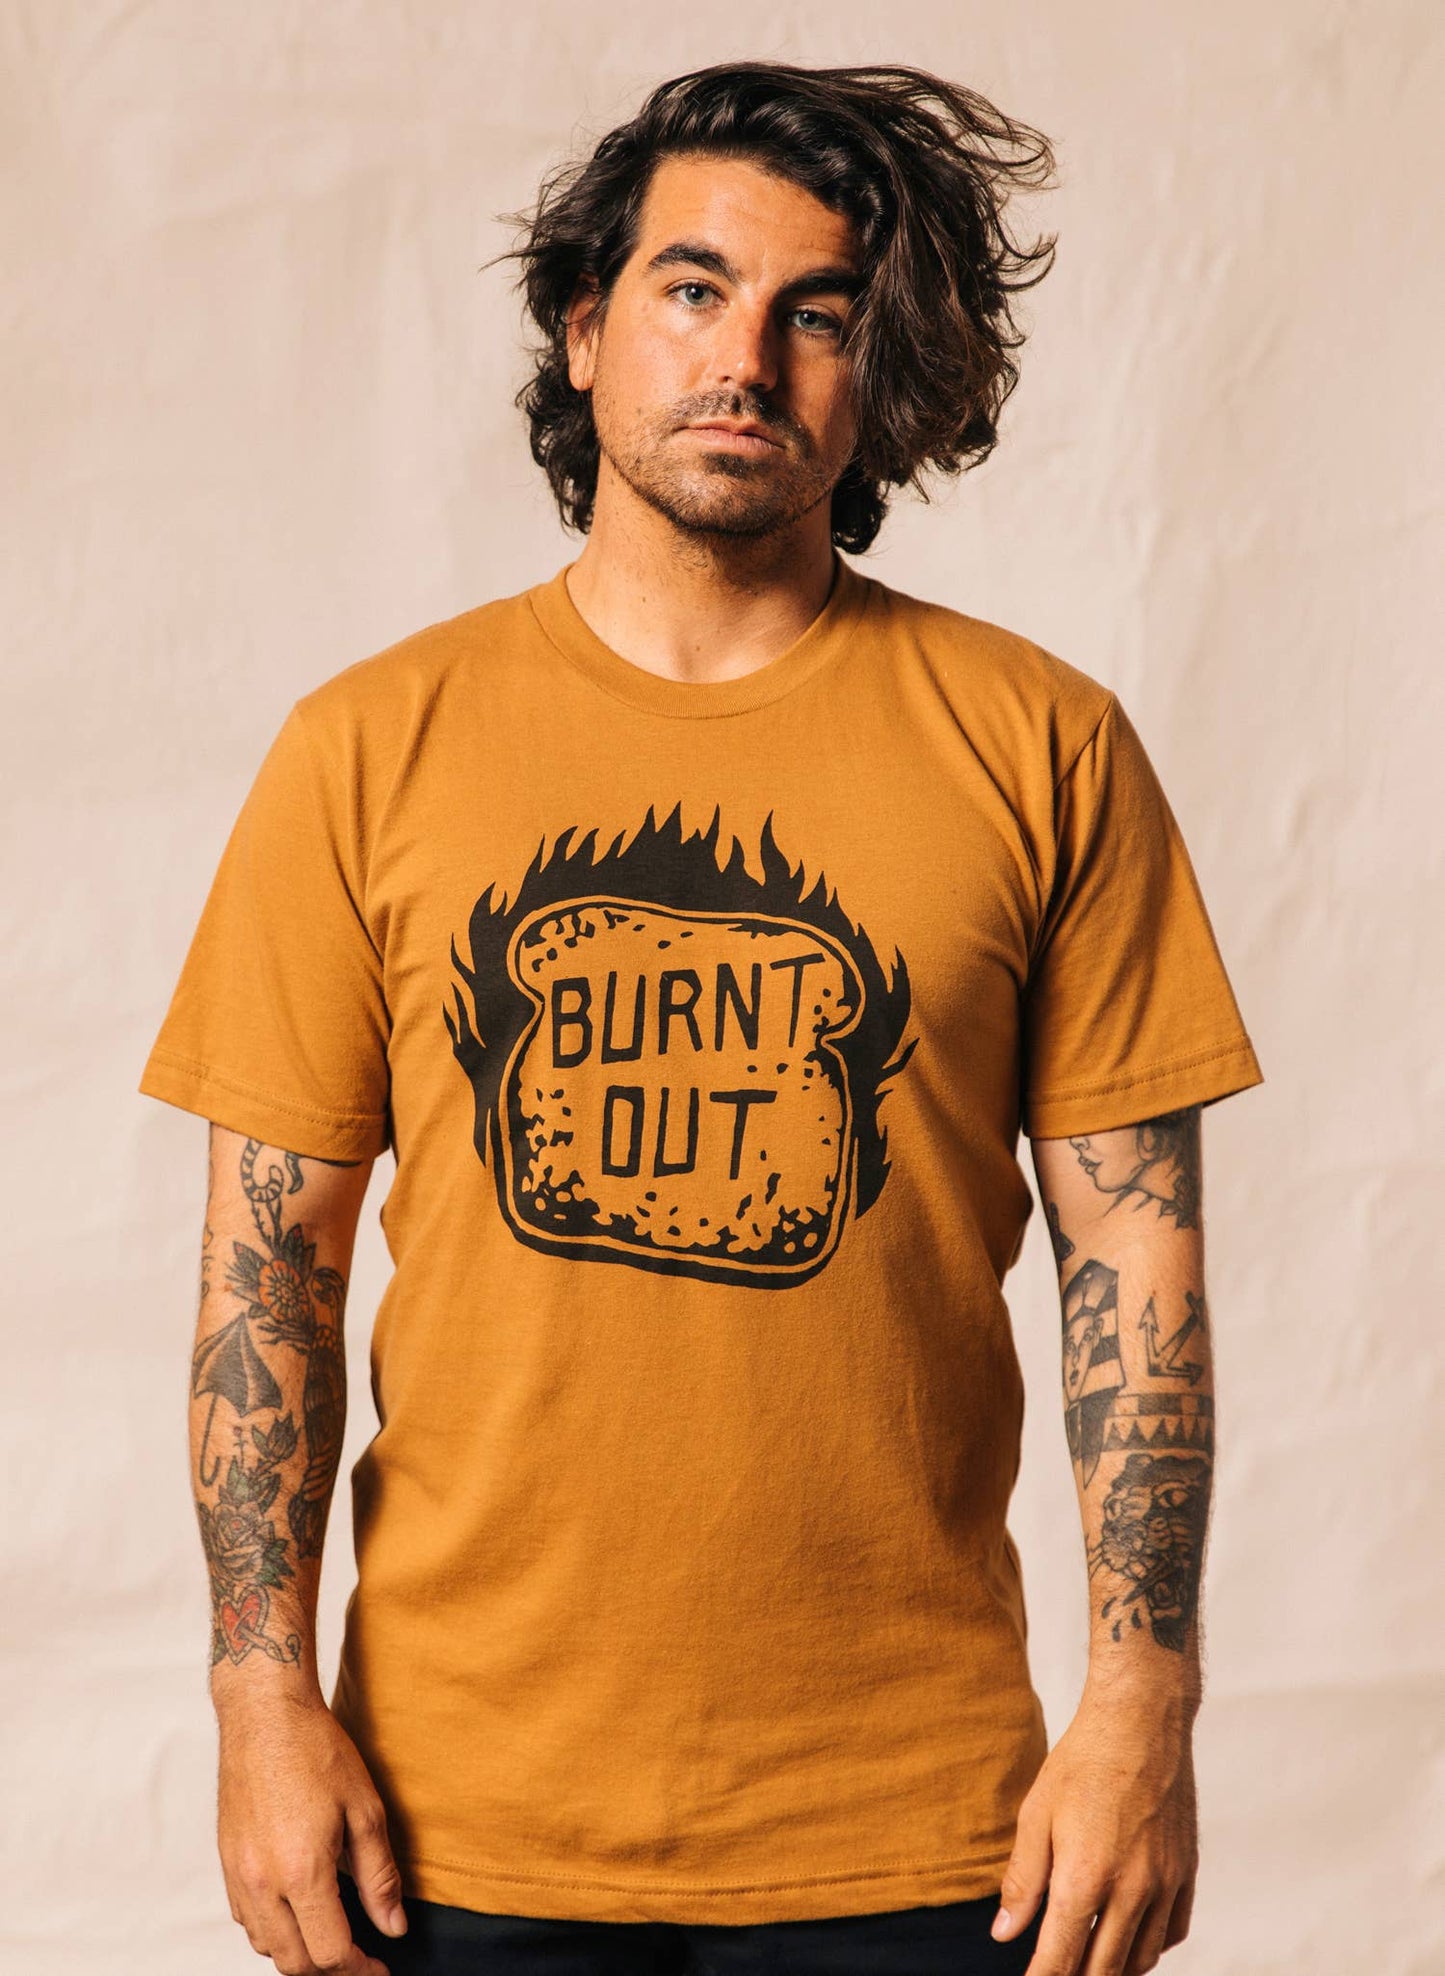 Tee (Unisex) - Burnt Out